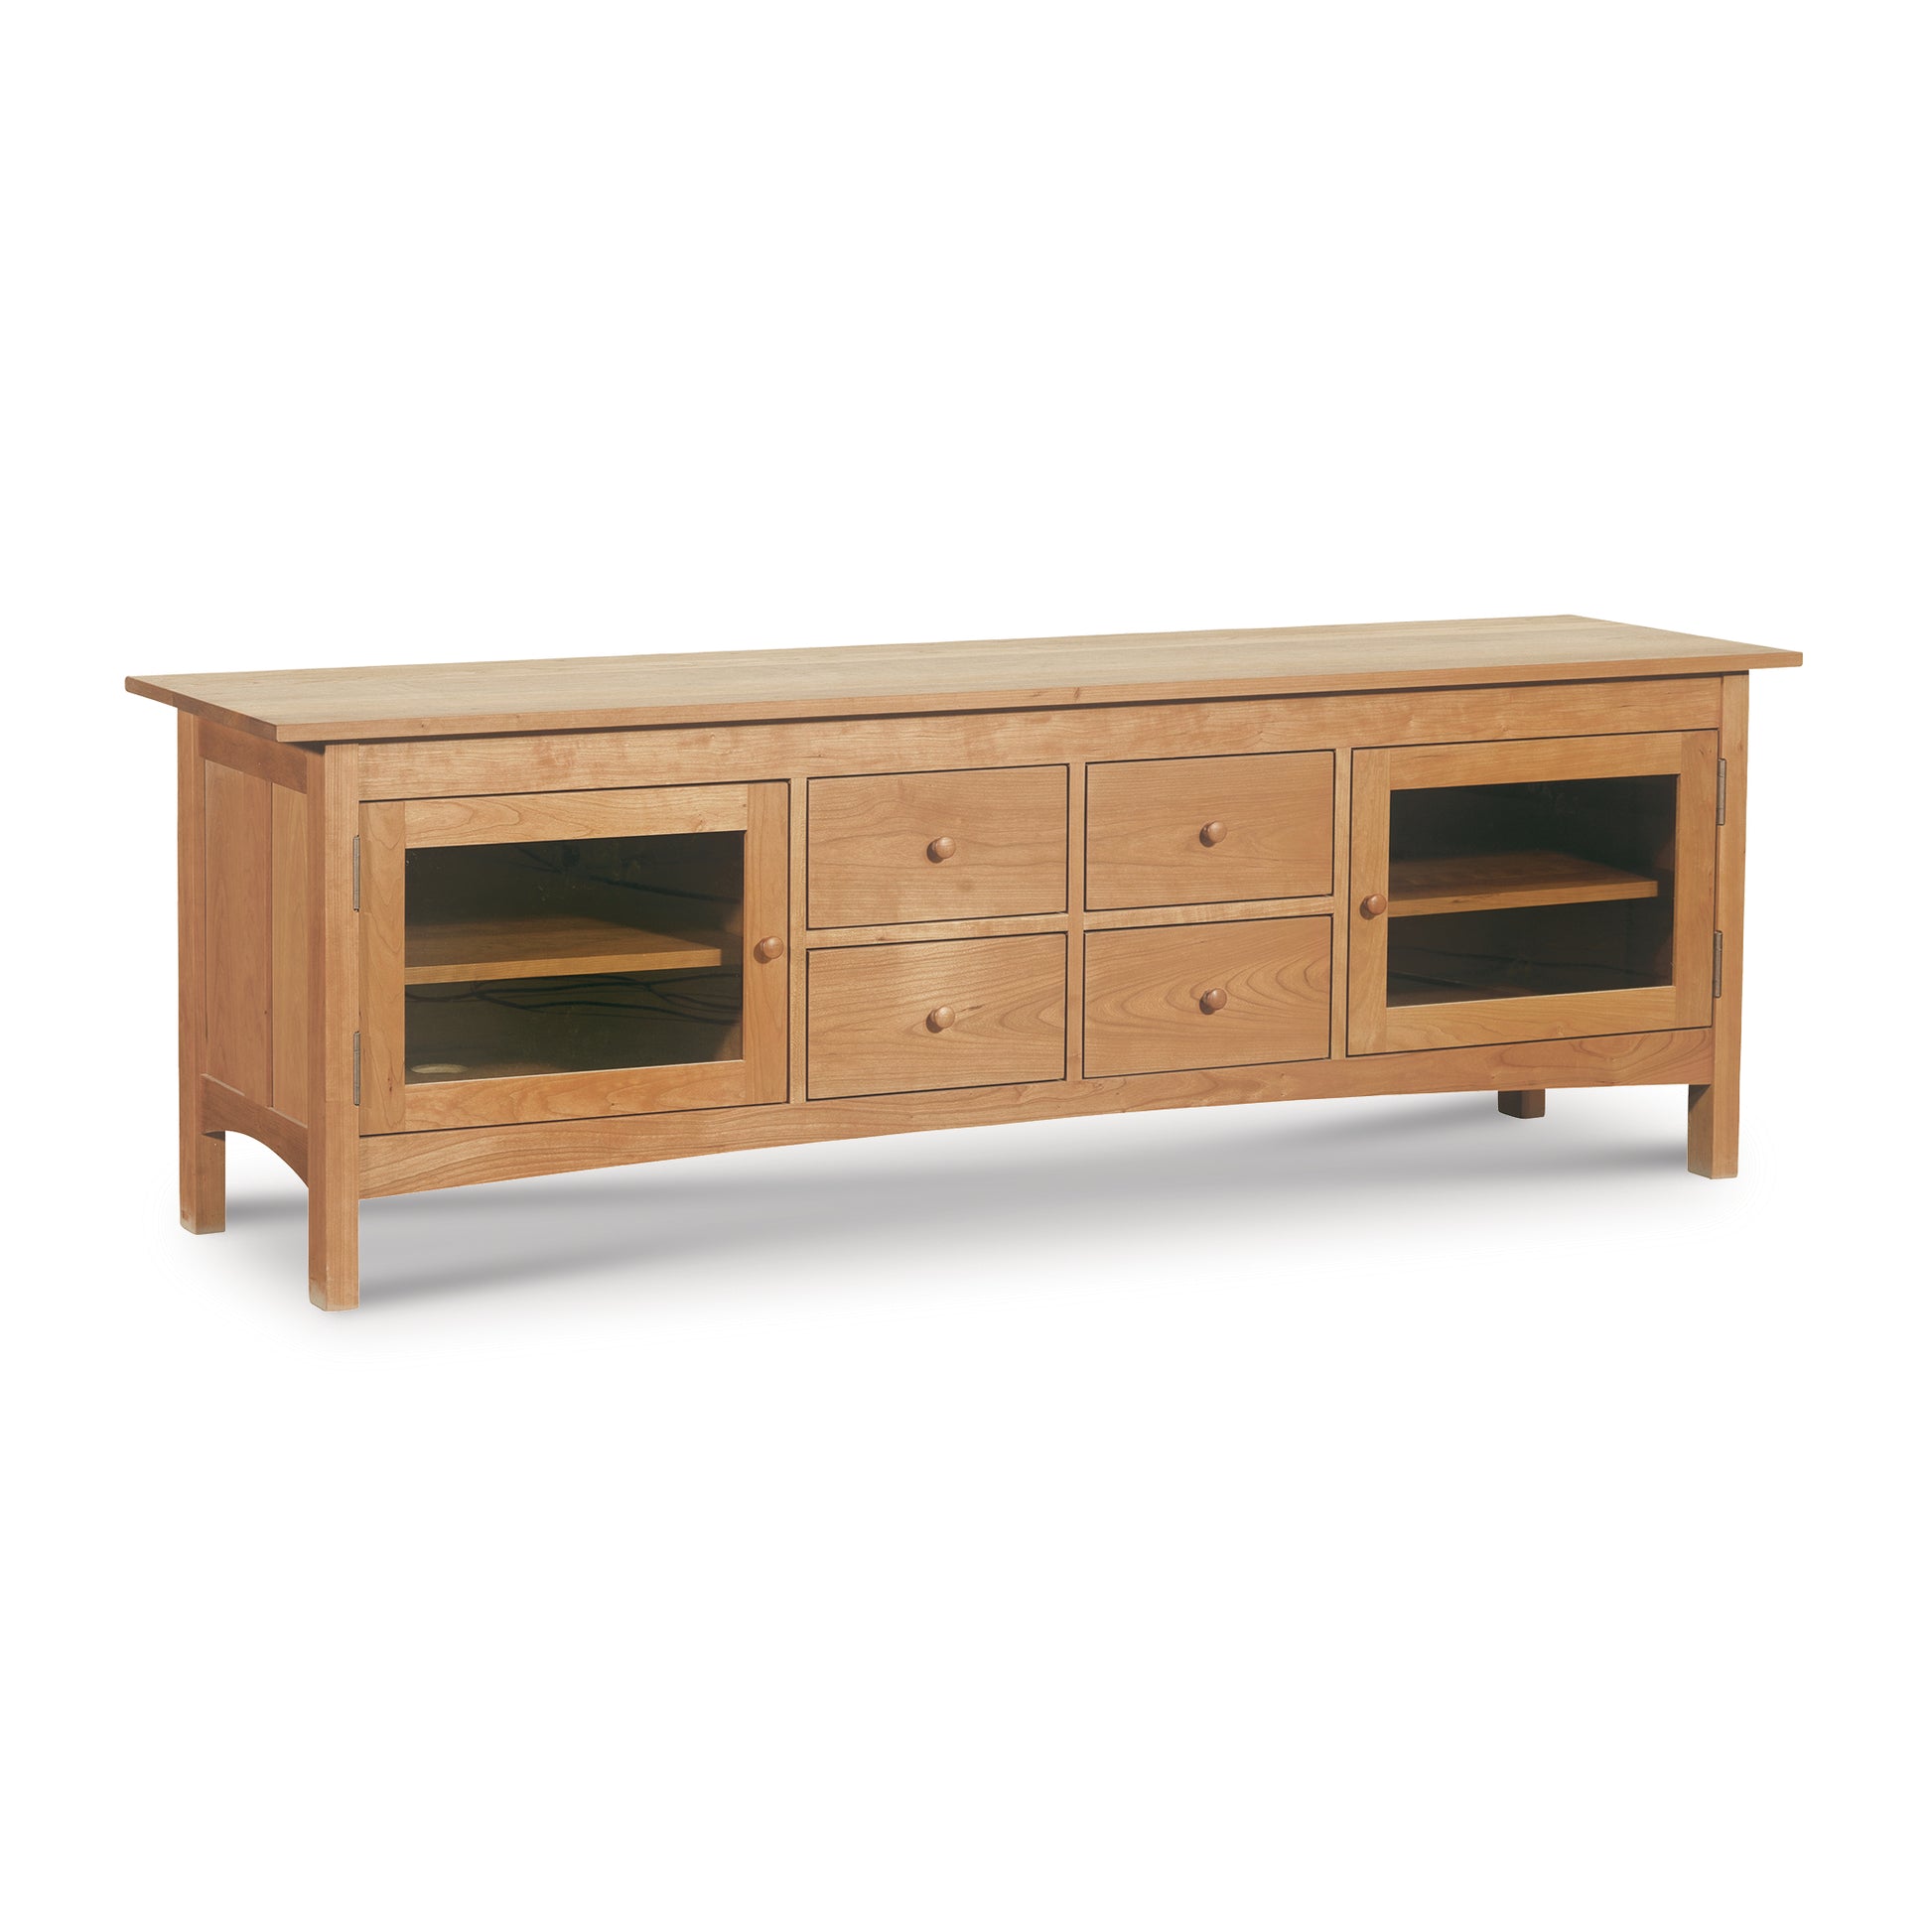 Handcrafted solid wood Vermont Furniture Designs Burlington Shaker 4-Drawer Media Console with multiple compartments and drawers, against a white background.